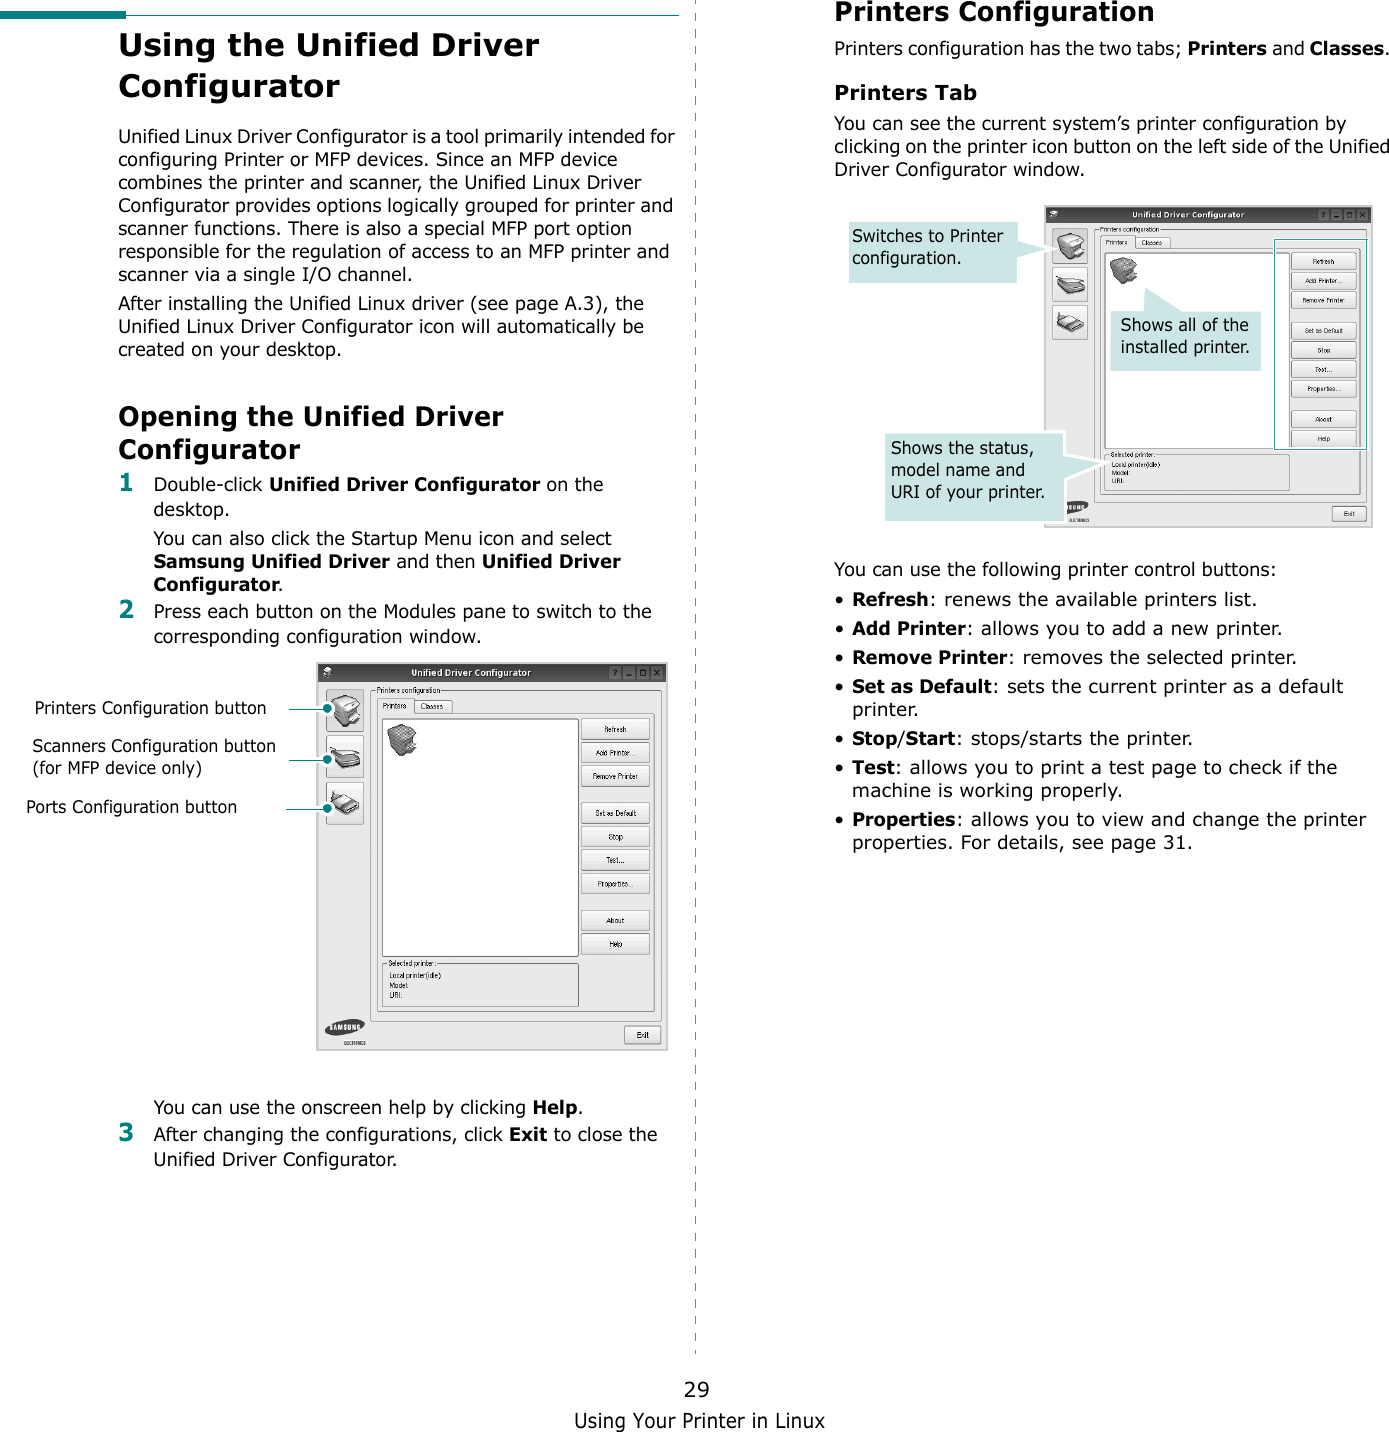 Using Your Printer in Linux29Using the Unified Driver ConfiguratorUnified Linux Driver Configurator is a tool primarily intended for configuring Printer or MFP devices. Since an MFP device combines the printer and scanner, the Unified Linux Driver Configurator provides options logically grouped for printer and scanner functions. There is also a special MFP port option responsible for the regulation of access to an MFP printer and scanner via a single I/O channel.After installing the Unified Linux driver (see page A.3), the Unified Linux Driver Configurator icon will automatically be created on your desktop.Opening the Unified Driver Configurator1Double-click Unified Driver Configurator on the desktop.You can also click the Startup Menu icon and select Samsung Unified Driver and then Unified Driver Configurator.2Press each button on the Modules pane to switch to the corresponding configuration window.You can use the onscreen help by clicking Help.3After changing the configurations, click Exit to close the Unified Driver Configurator.Printers Configuration buttonScanners Configuration button (for MFP device only)Ports Configuration buttonPrinters ConfigurationPrinters configuration has the two tabs; Printers and Classes. Printers TabYou can see the current system’s printer configuration by clicking on the printer icon button on the left side of the Unified Driver Configurator window.You can use the following printer control buttons:•Refresh: renews the available printers list.•Add Printer: allows you to add a new printer.•Remove Printer: removes the selected printer.•Set as Default: sets the current printer as a default printer.•Stop/Start: stops/starts the printer.•Test: allows you to print a test page to check if the machine is working properly.•Properties: allows you to view and change the printer properties. For details, see page 31.Shows all of the installed printer.Switches to Printer configuration.Shows the status, model name and URI of your printer.